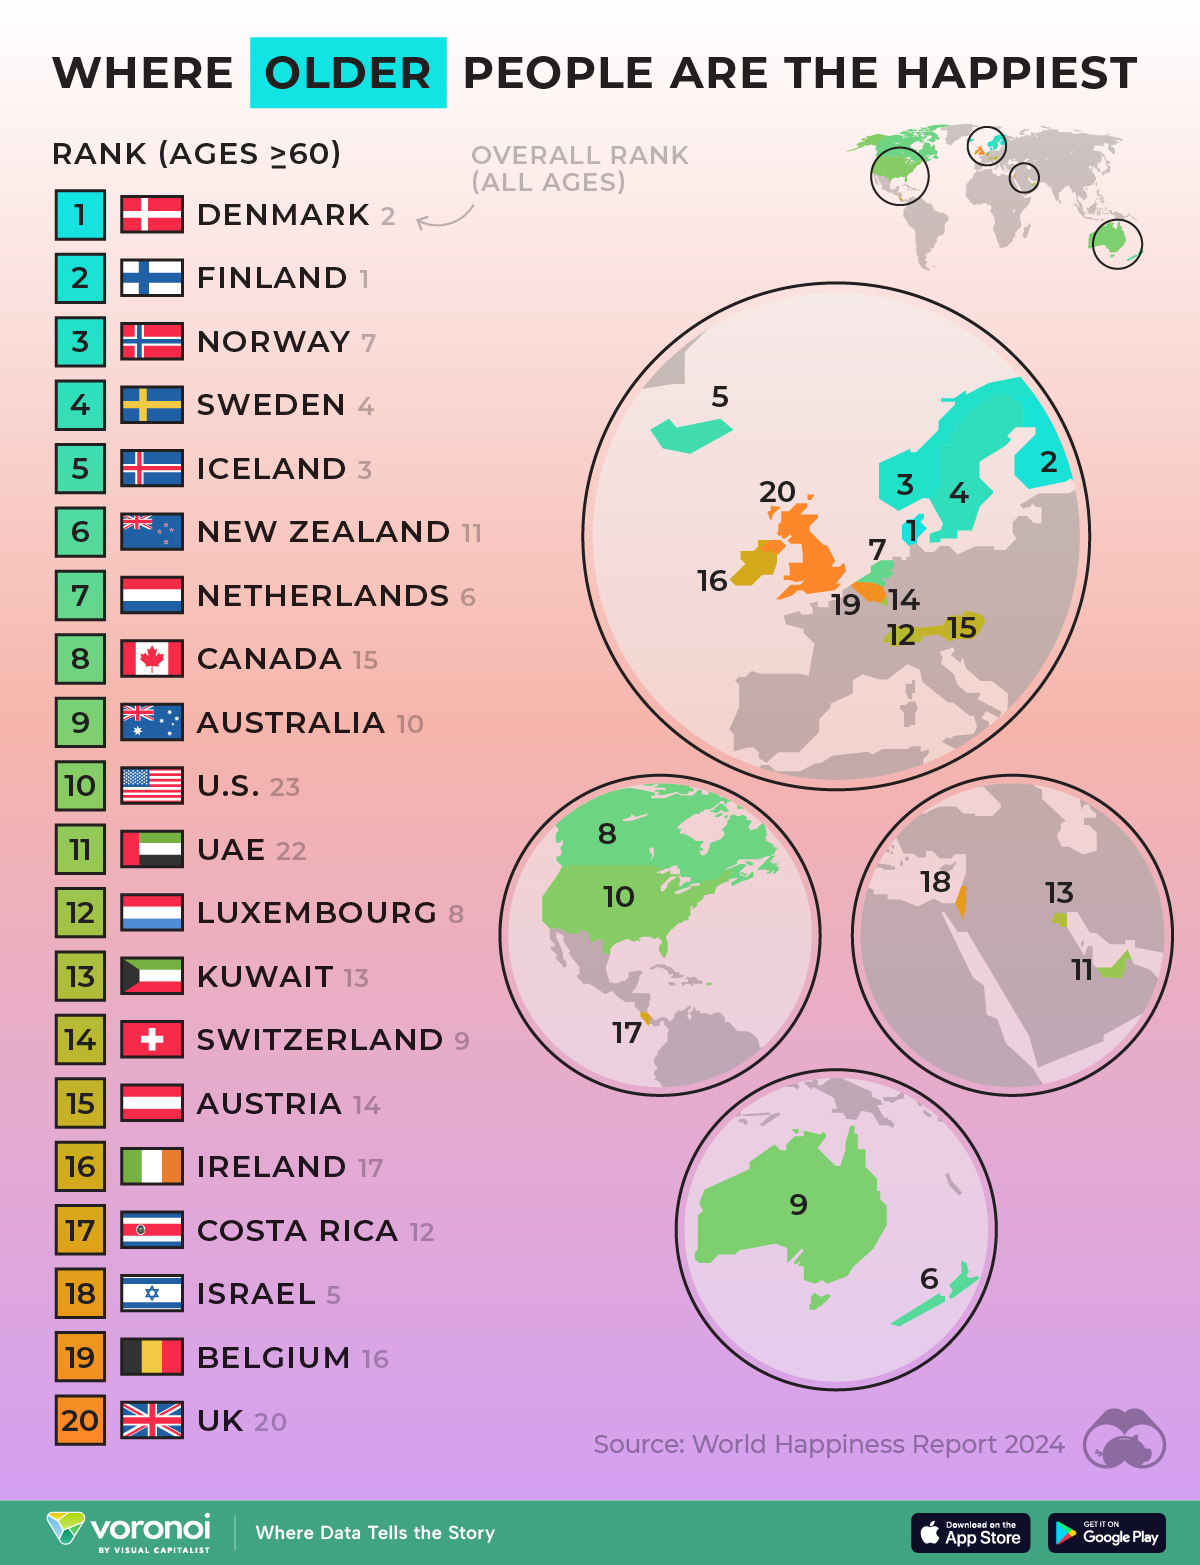 A chart ranking the top 20 happiest countries, for those over 60 years old, sourced from the World Happiness Report 2024.